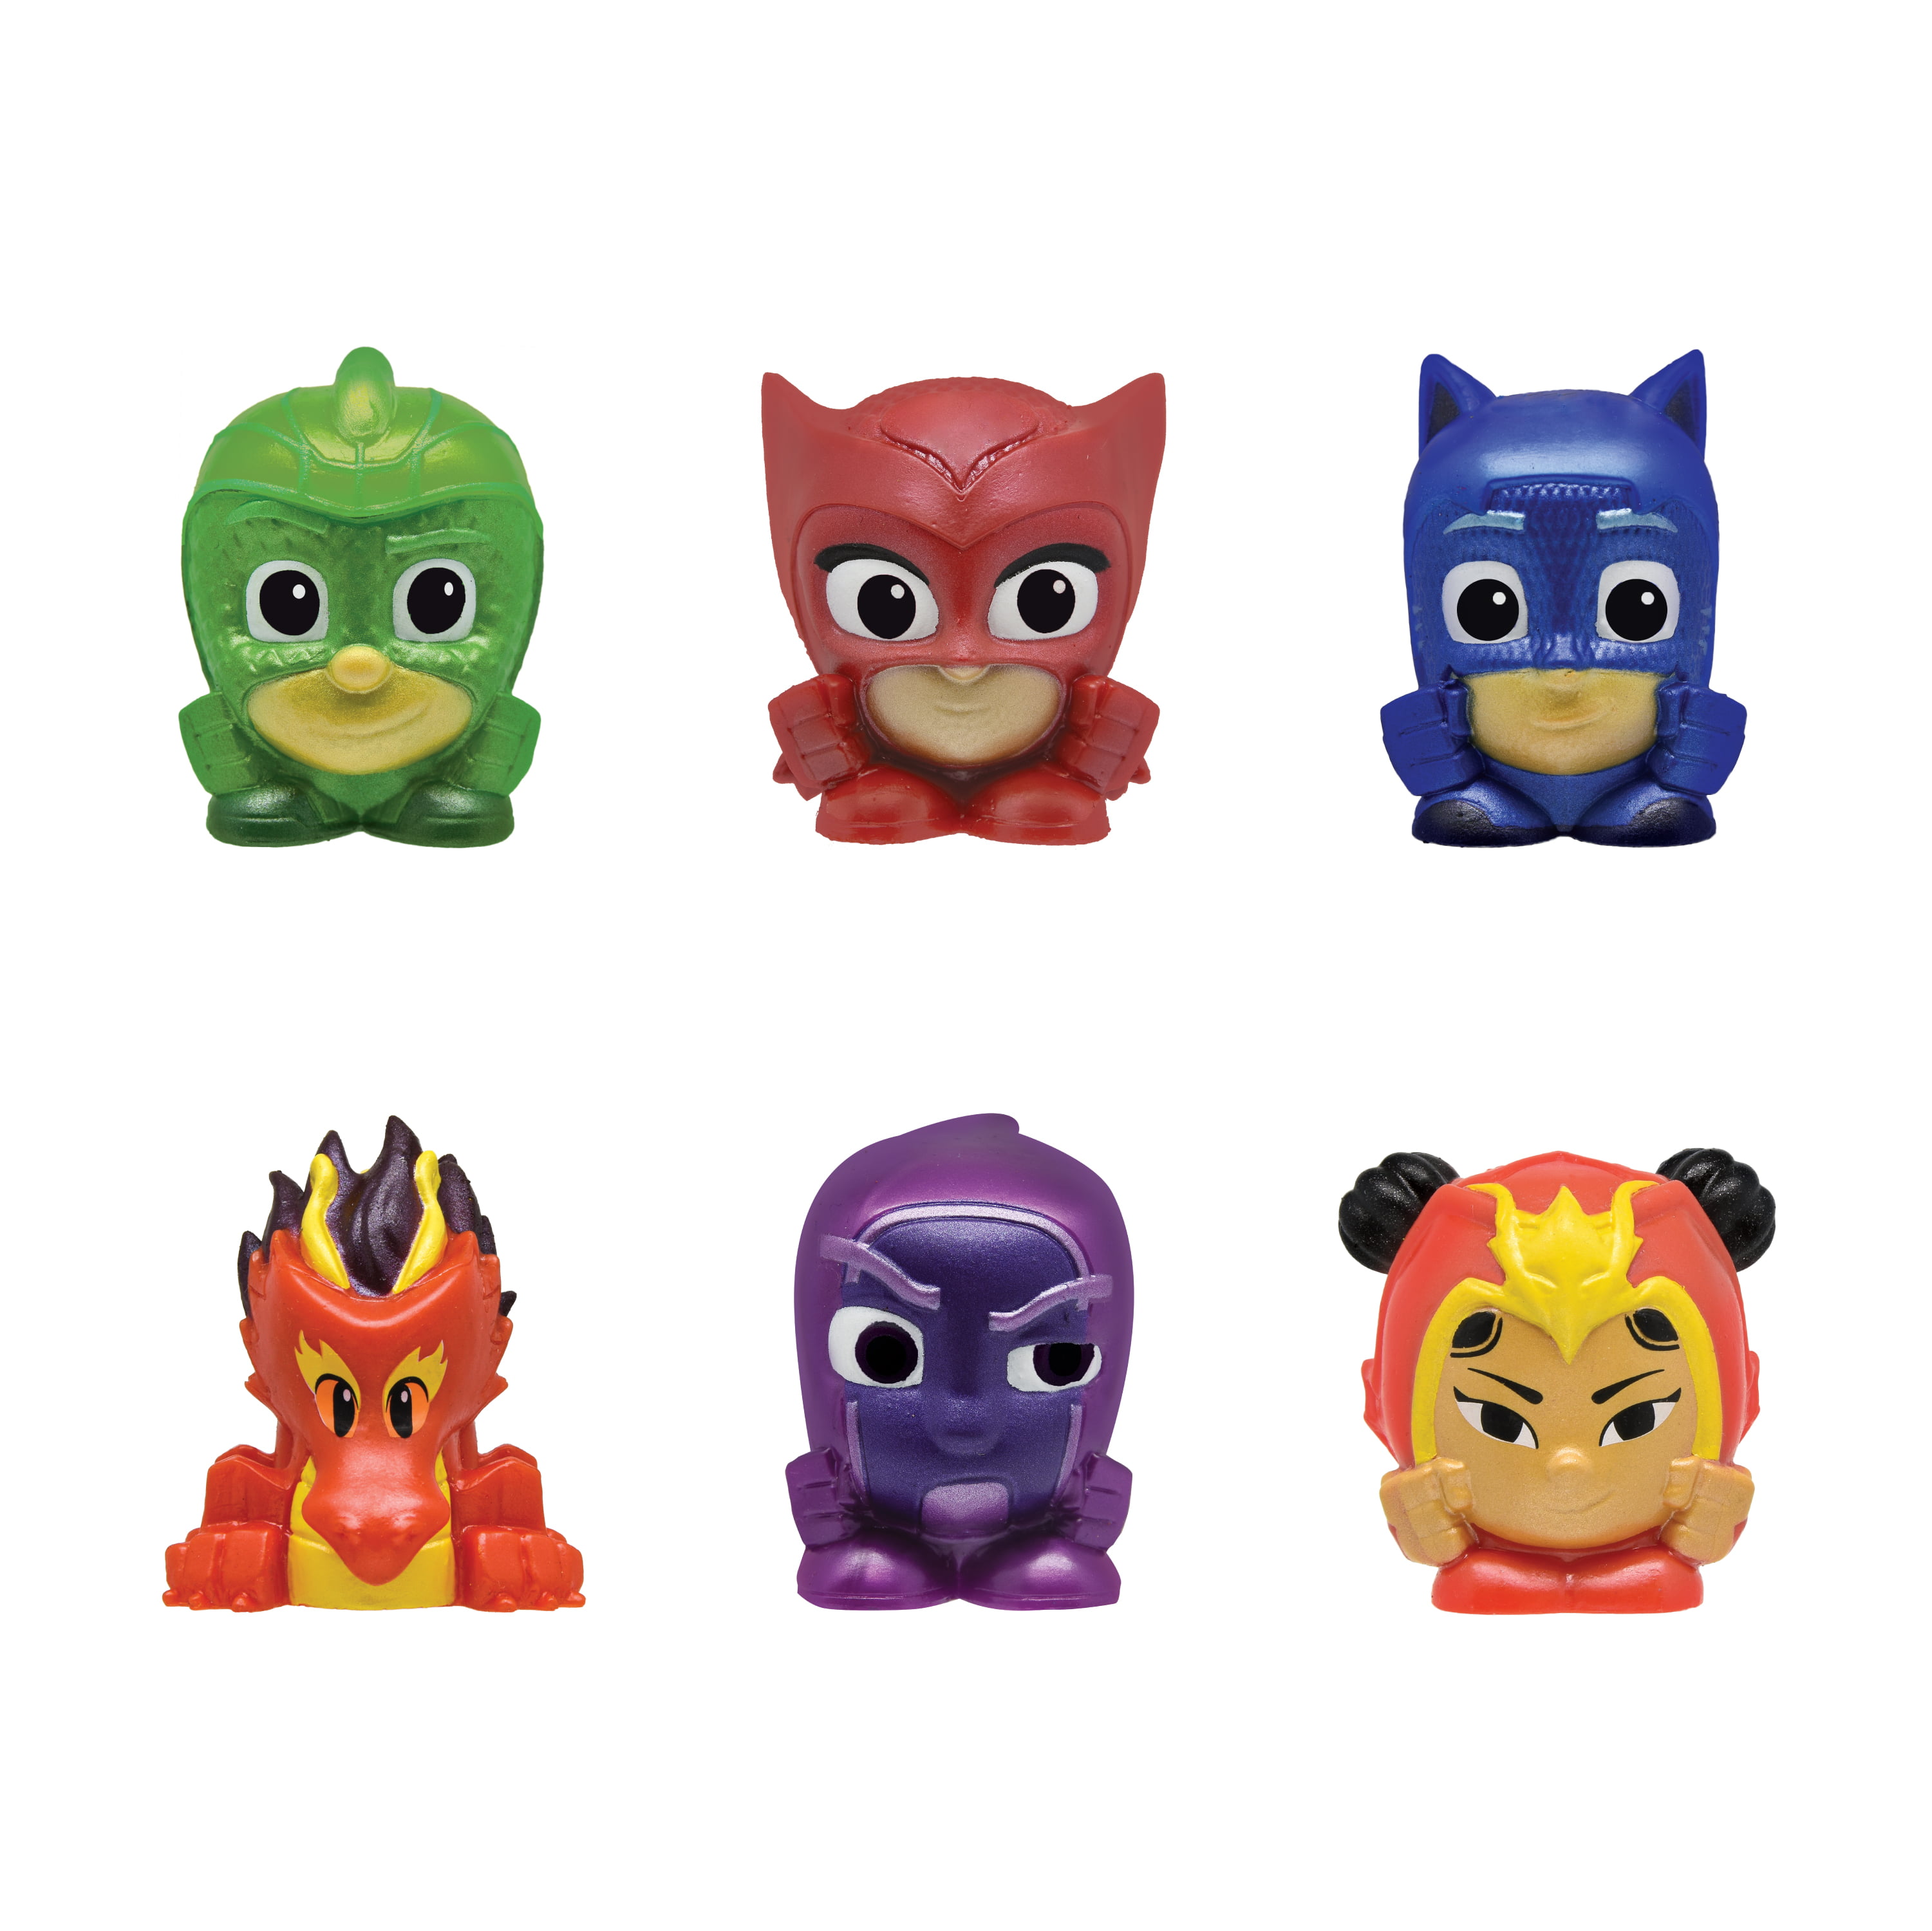 Details about    NEW RELEASE-Mashems-Fashems-PJ MASKS SER #3- One character per blind SPHERE 6x 